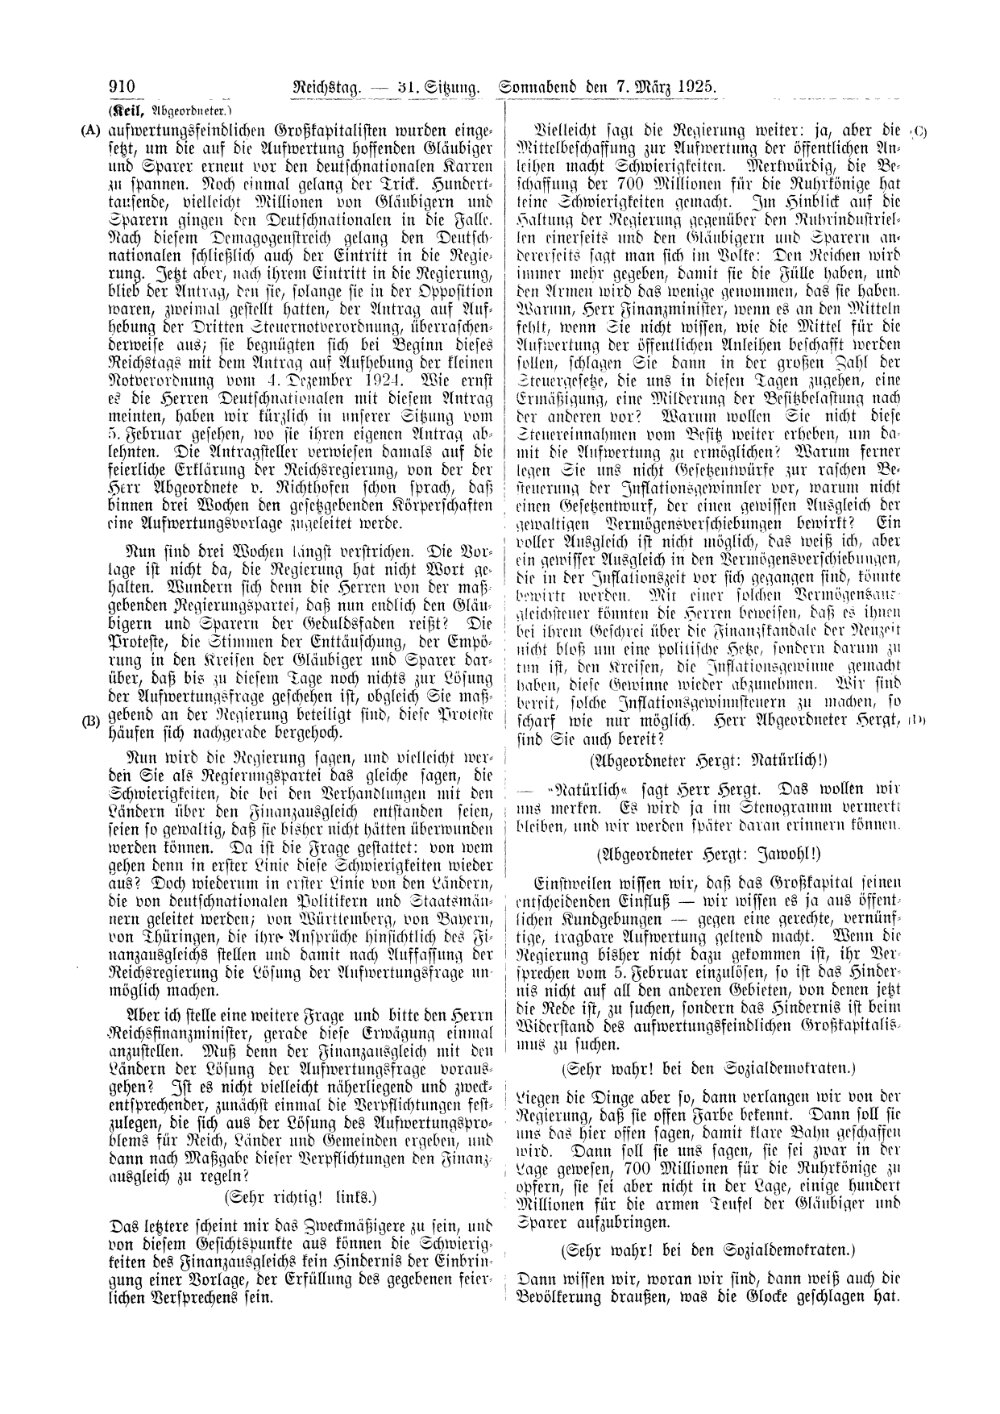 Scan of page 910